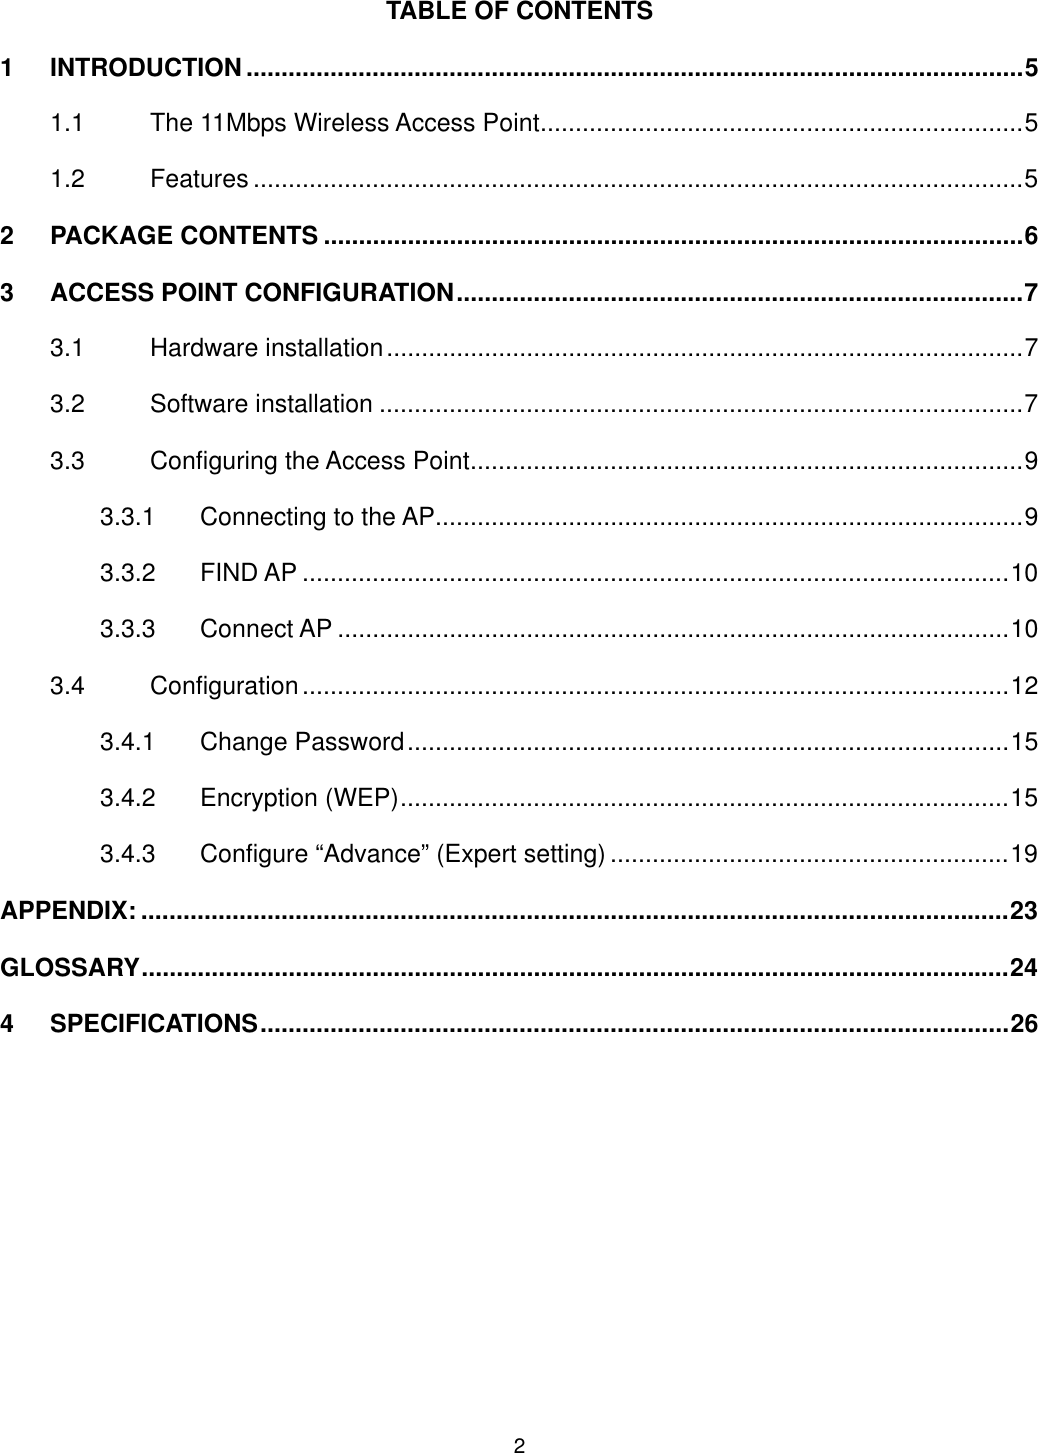  TABLE OF CONTENTS 1 INTRODUCTION ...............................................................................................................5 1.1 The 11Mbps Wireless Access Point.....................................................................5 1.2 Features ..............................................................................................................5 2 PACKAGE CONTENTS ....................................................................................................6 3 ACCESS POINT CONFIGURATION.................................................................................7 3.1 Hardware installation...........................................................................................7 3.2 Software installation ............................................................................................7 3.3 Configuring the Access Point...............................................................................9 3.3.1 Connecting to the AP....................................................................................9 3.3.2 FIND AP .....................................................................................................10 3.3.3 Connect AP ................................................................................................10 3.4 Configuration.....................................................................................................12 3.4.1 Change Password......................................................................................15 3.4.2 Encryption (WEP).......................................................................................15 3.4.3 Configure “Advance” (Expert setting) .........................................................19 APPENDIX: ............................................................................................................................23 GLOSSARY............................................................................................................................24 4 SPECIFICATIONS...........................................................................................................26  2